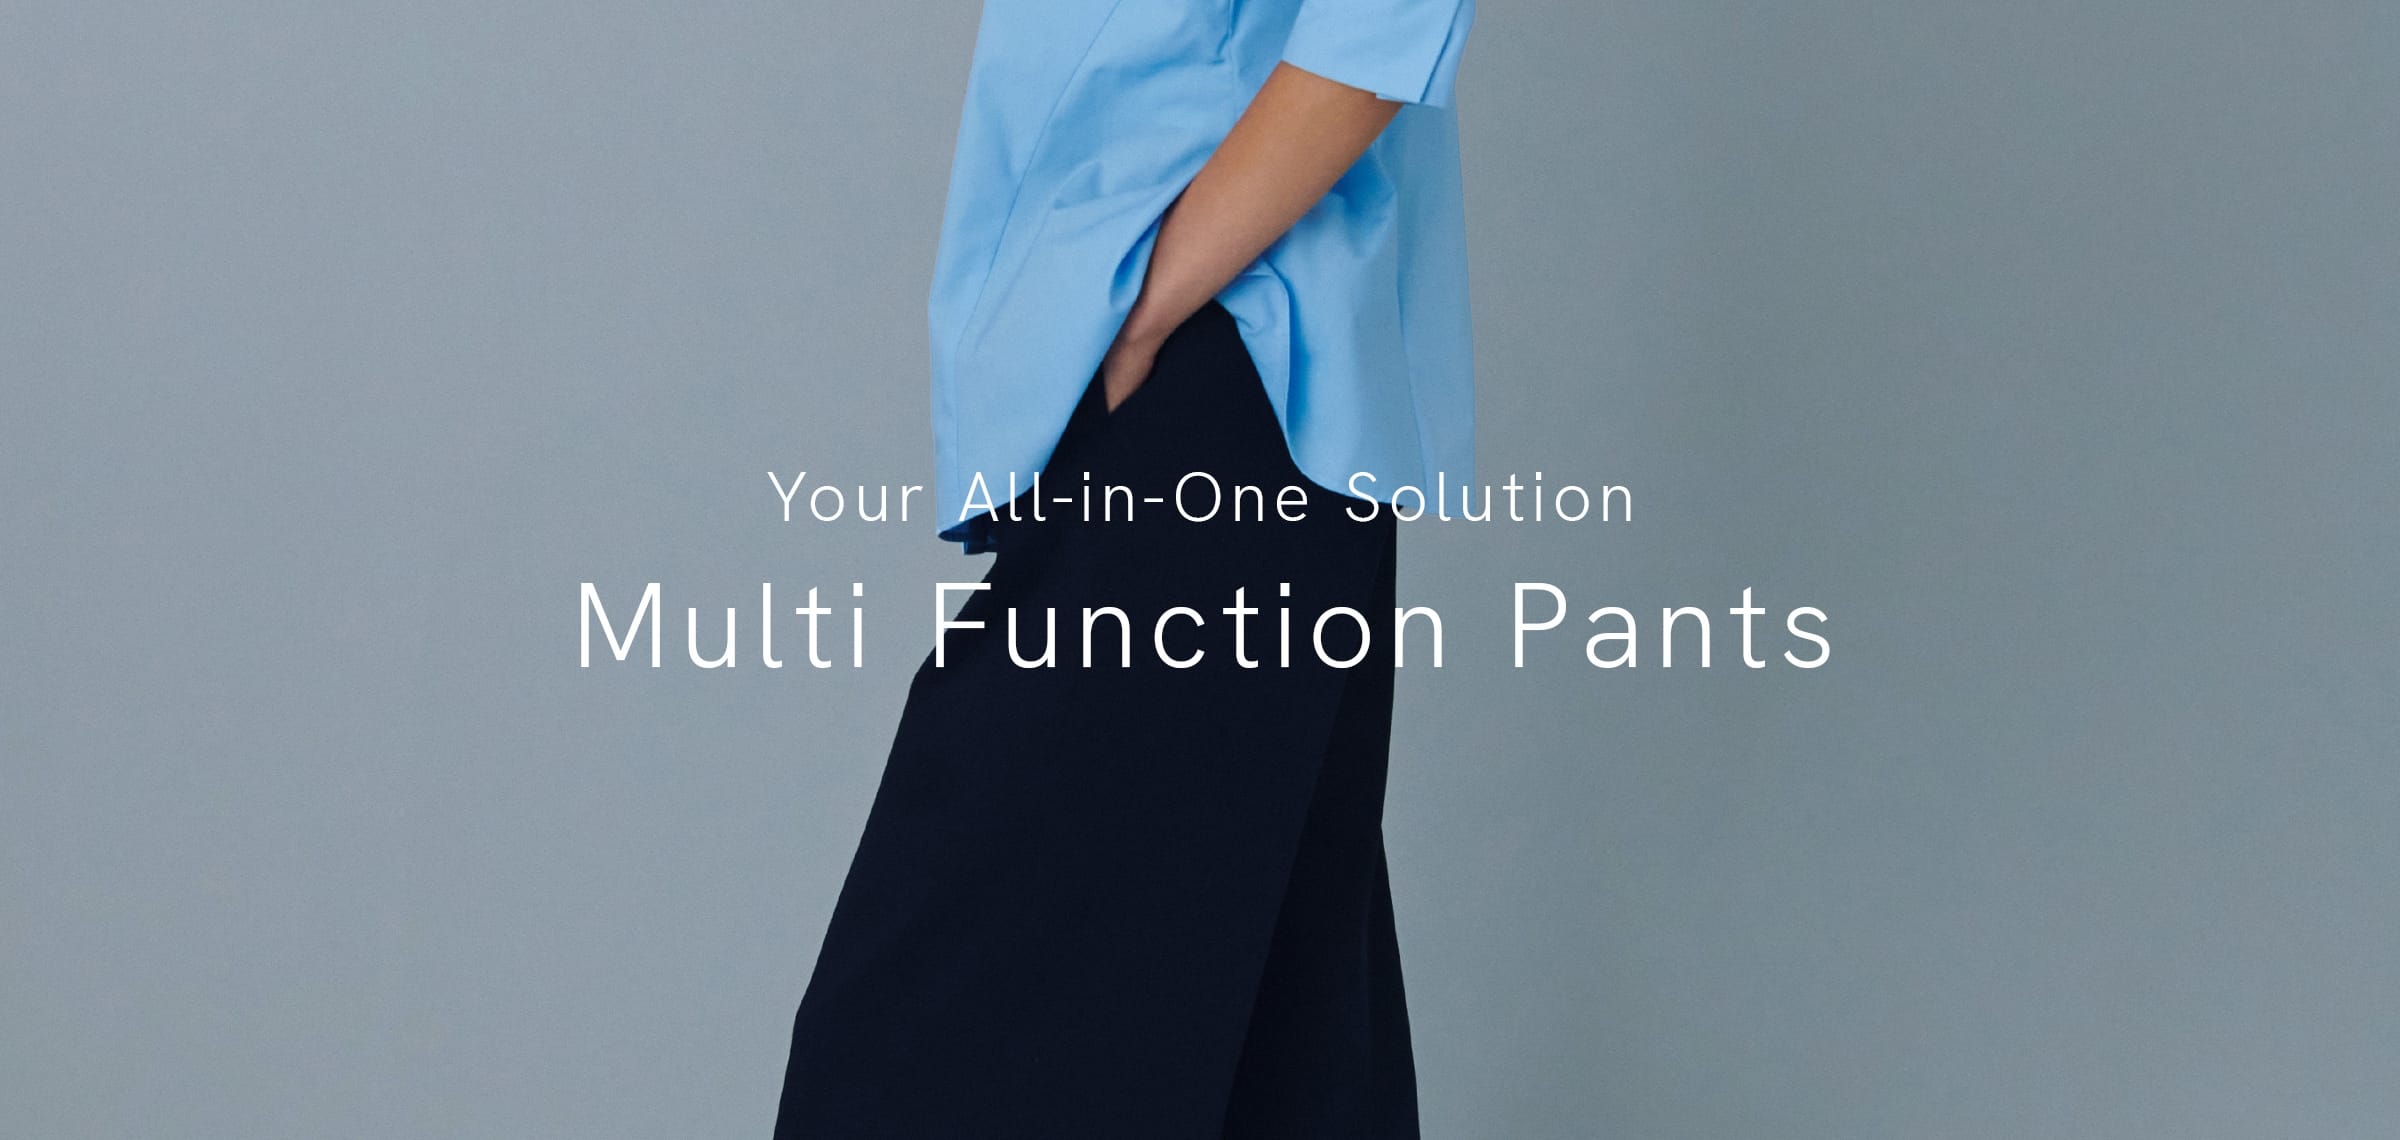 Your All-in-One Solution Multi Function Pants